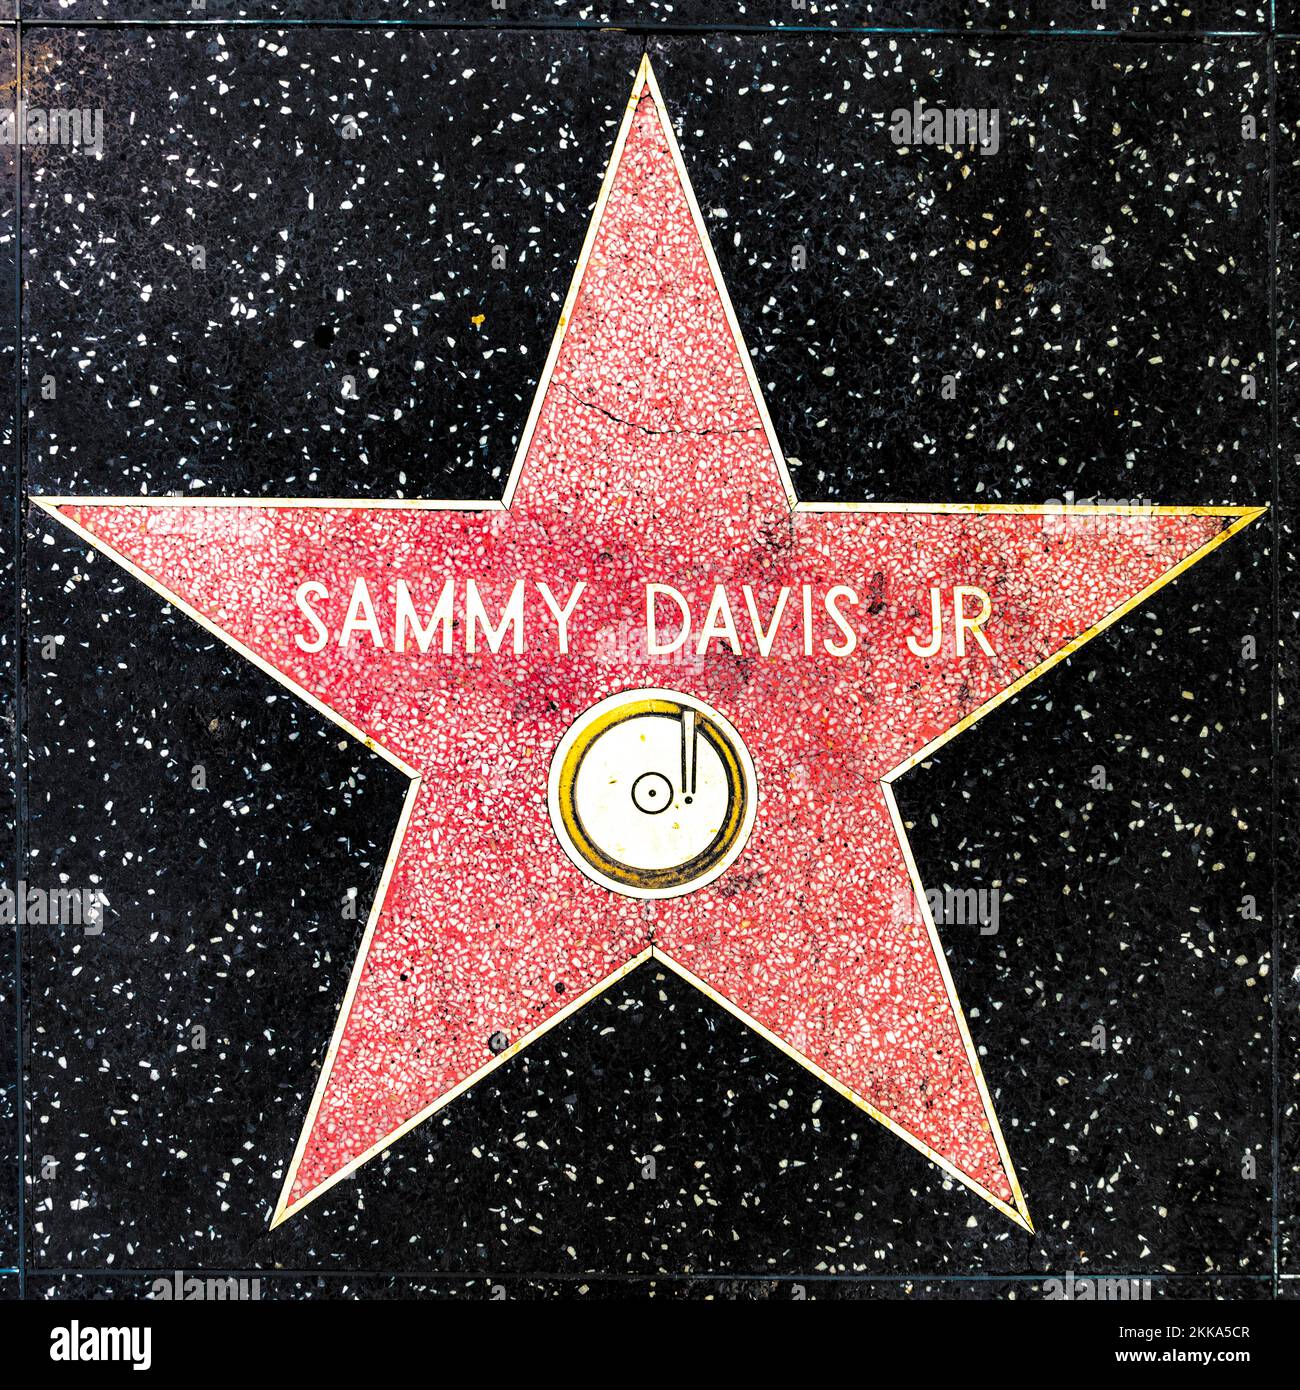 Los Angeles, USA - March 17, 2019: closeup of Star on the Hollywood Walk of Fame for Sammy Davis JR. Stock Photo